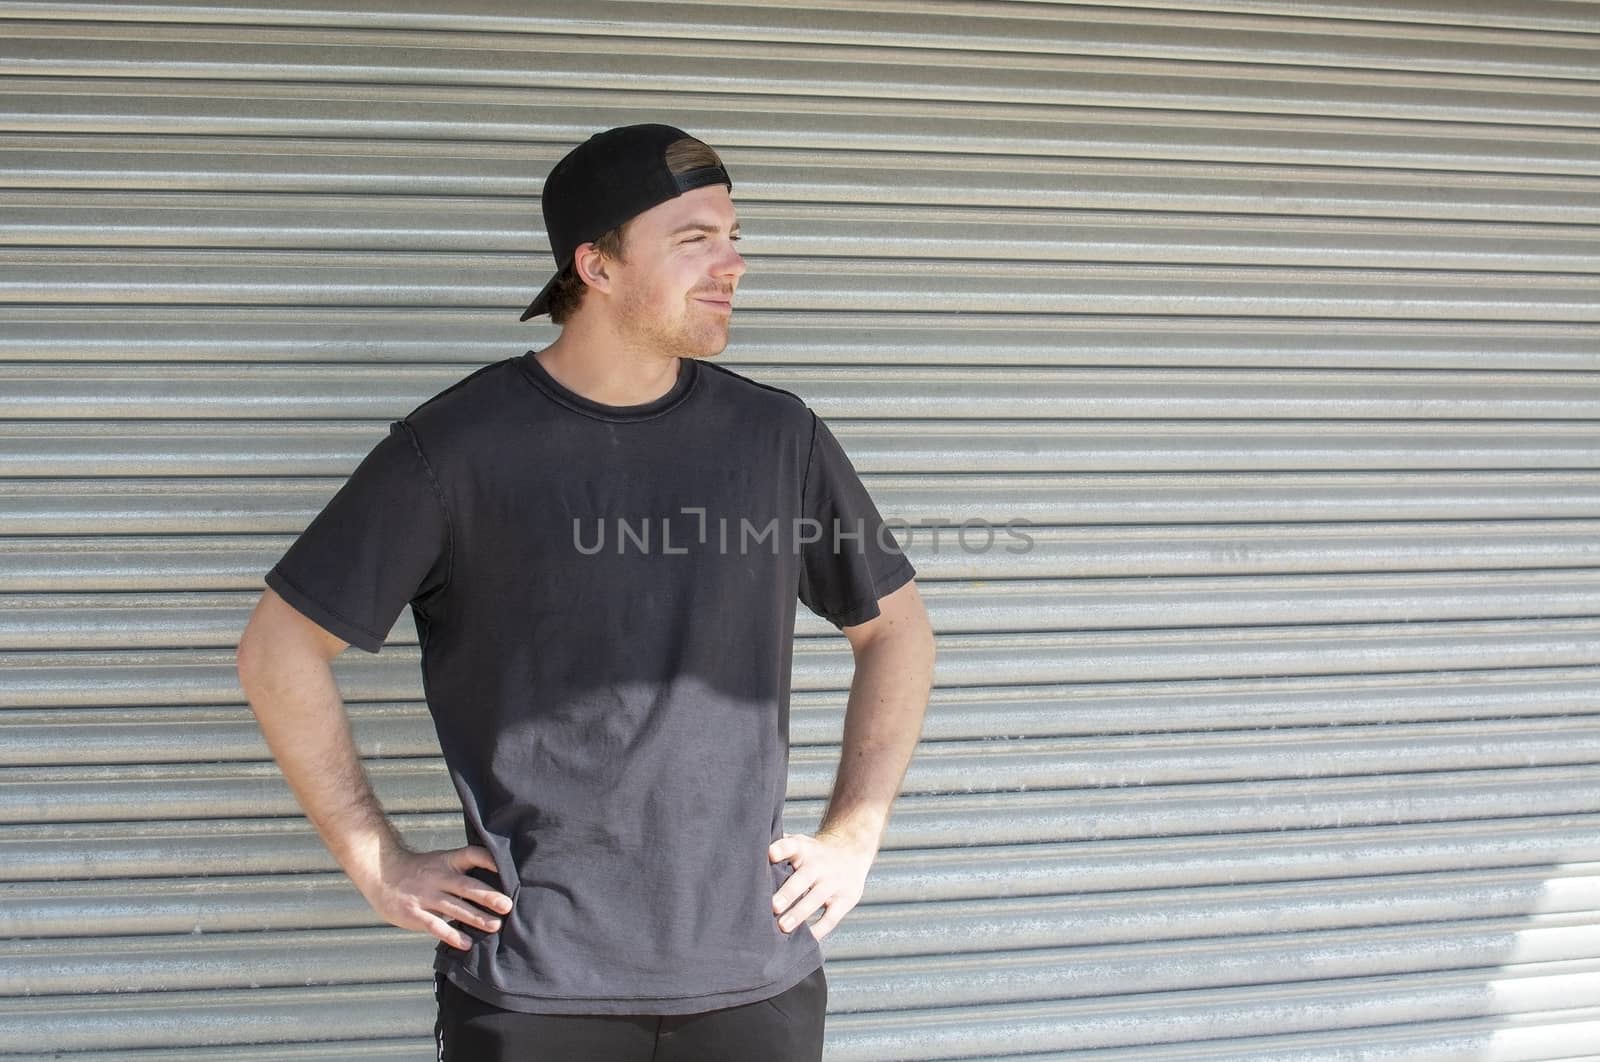 Young casual sporty dressed man with cap backwards in black against corrugated iron wall street style